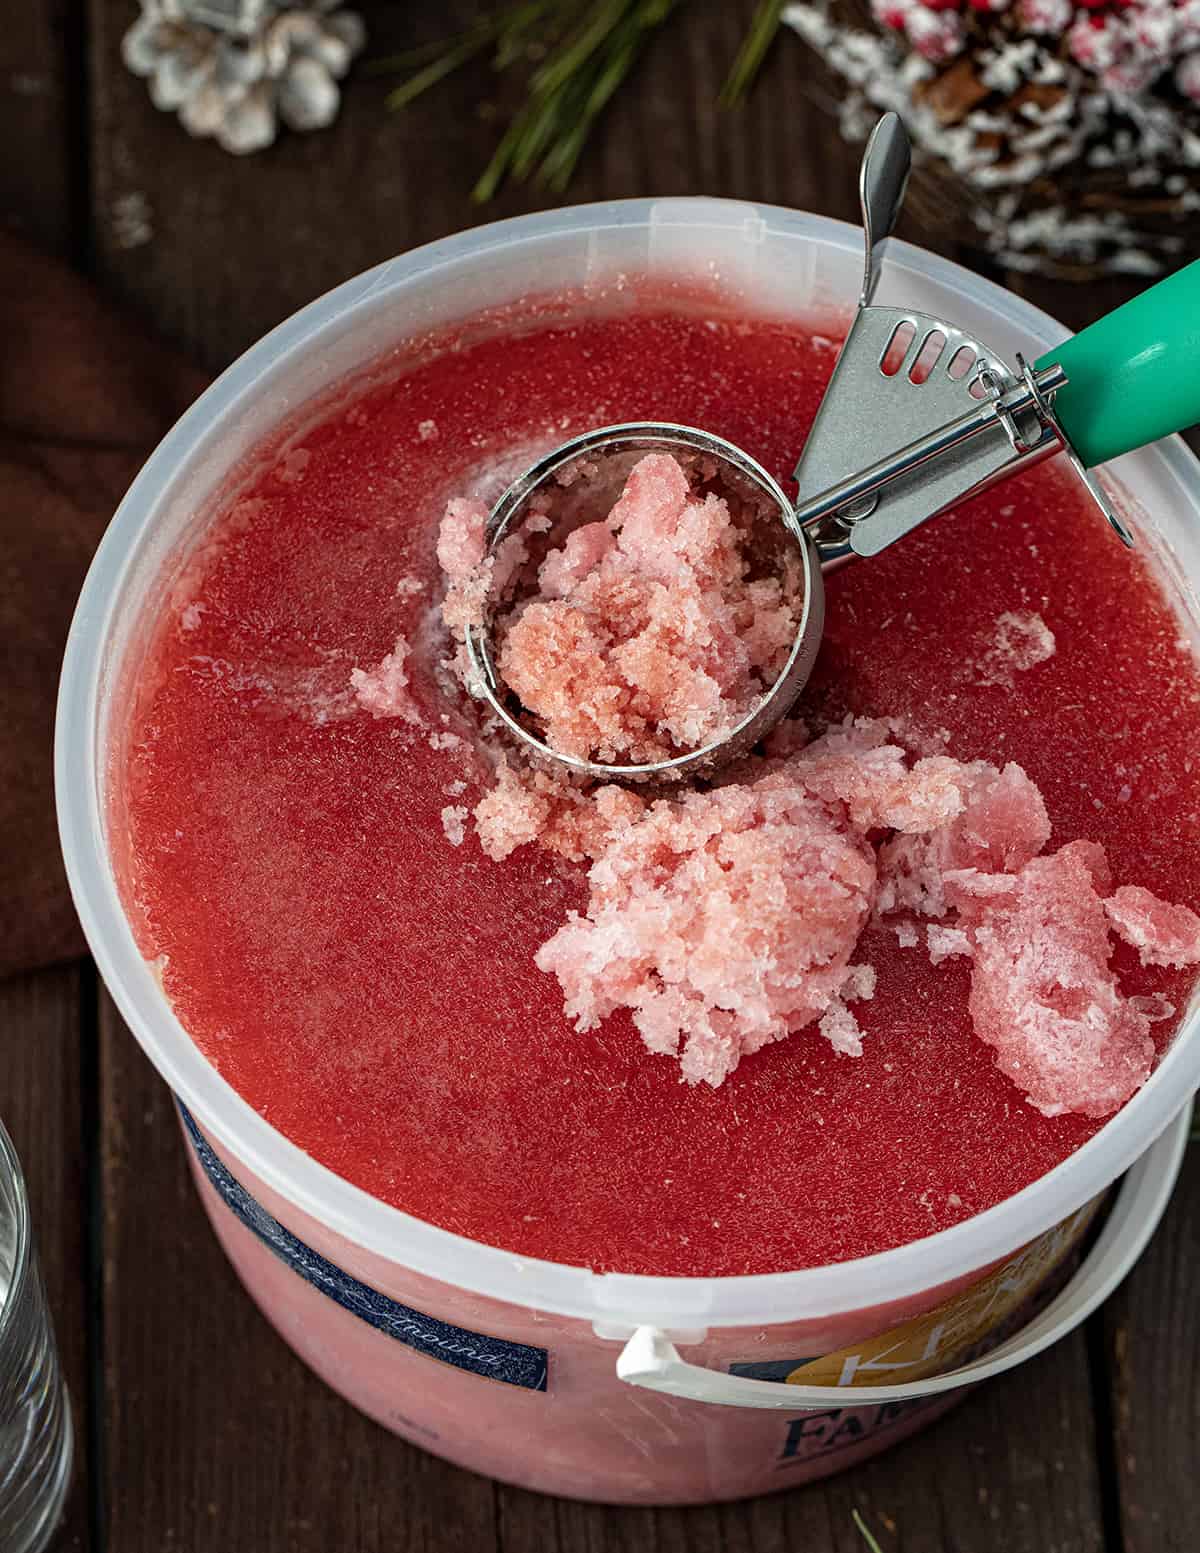 Bucket of Christmas Slush with Some Scooped Out.